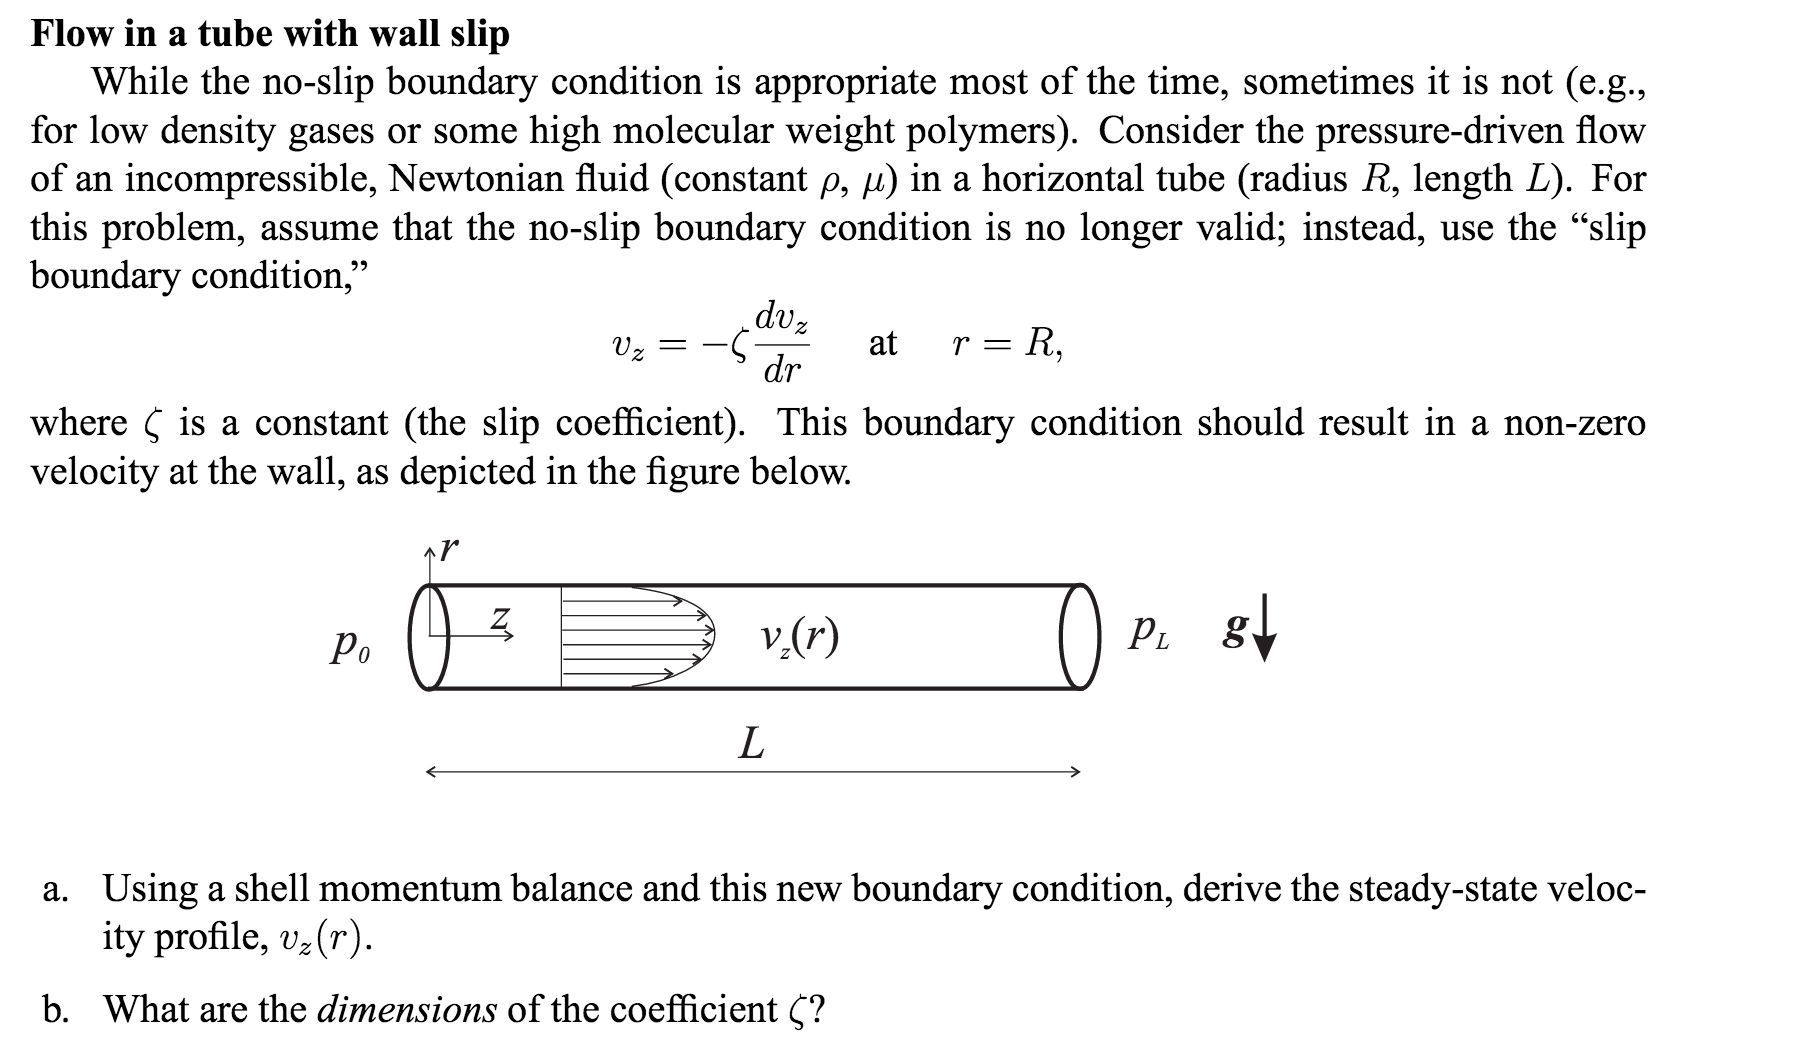 Pipe flow with a no-slip (a) and with a slip (b) boundary condition.